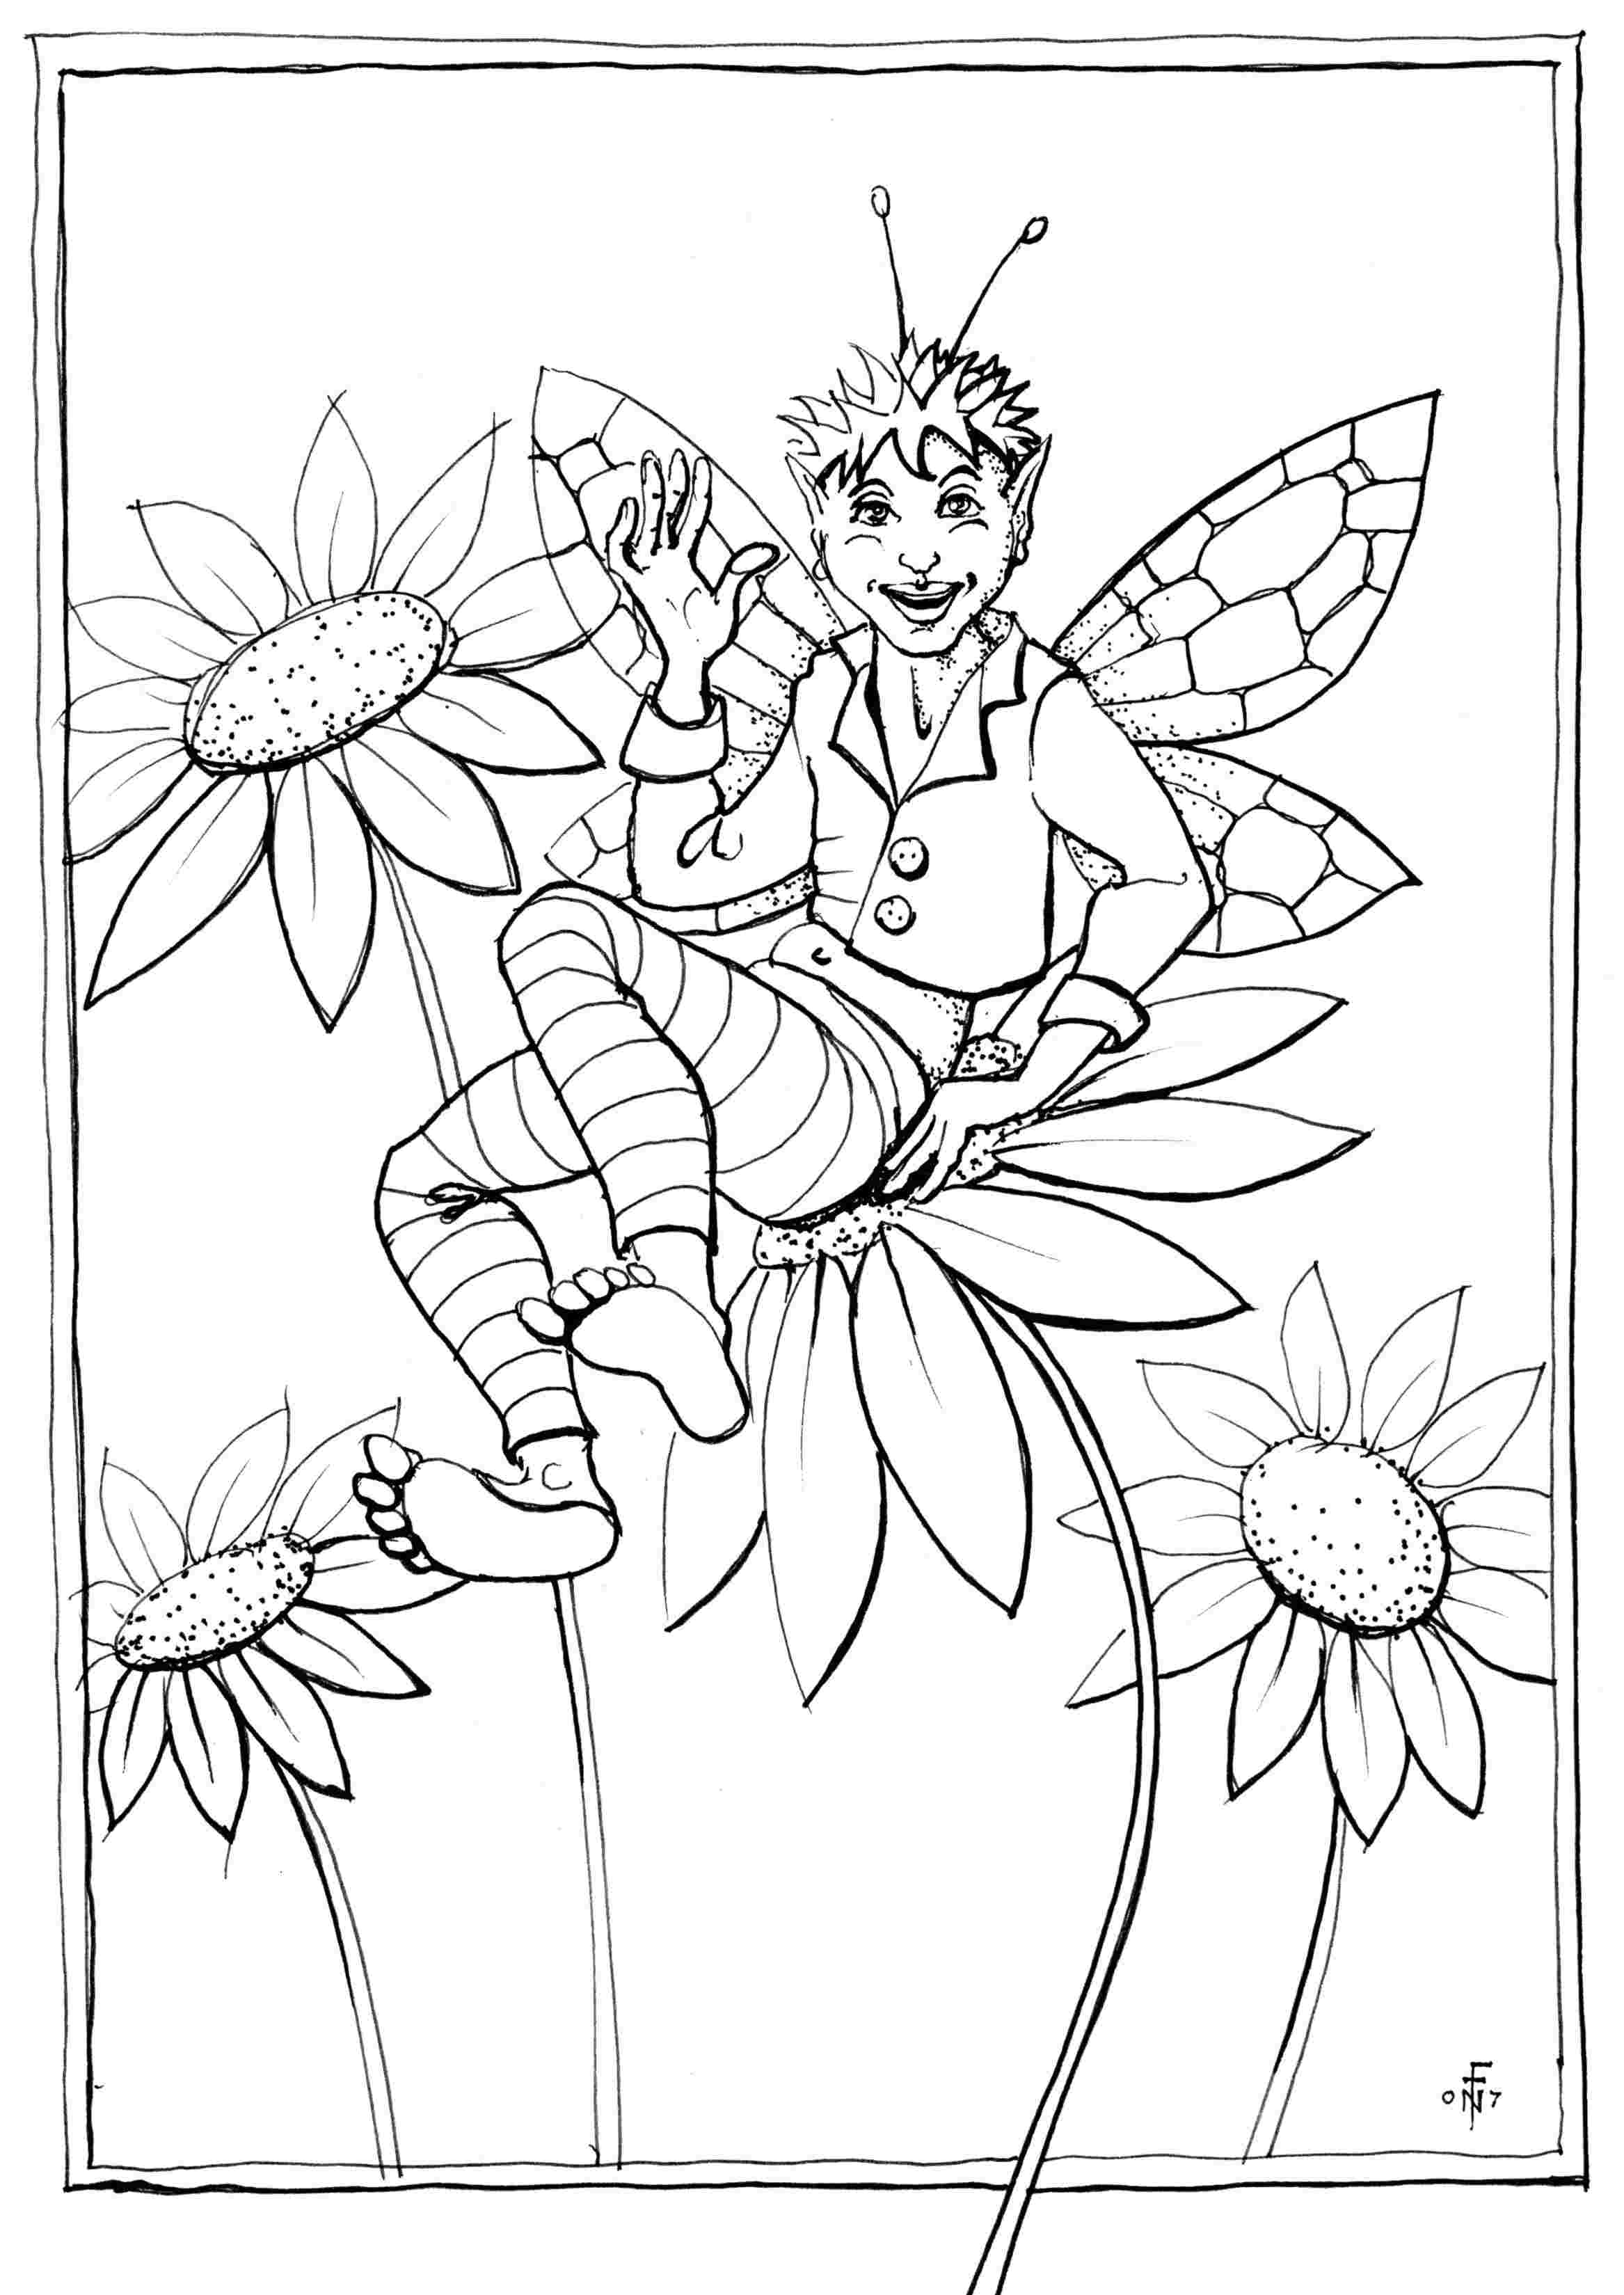 Sitting on the Daisies - colouring-in drawing - to download, right click and save, print out and colour in!